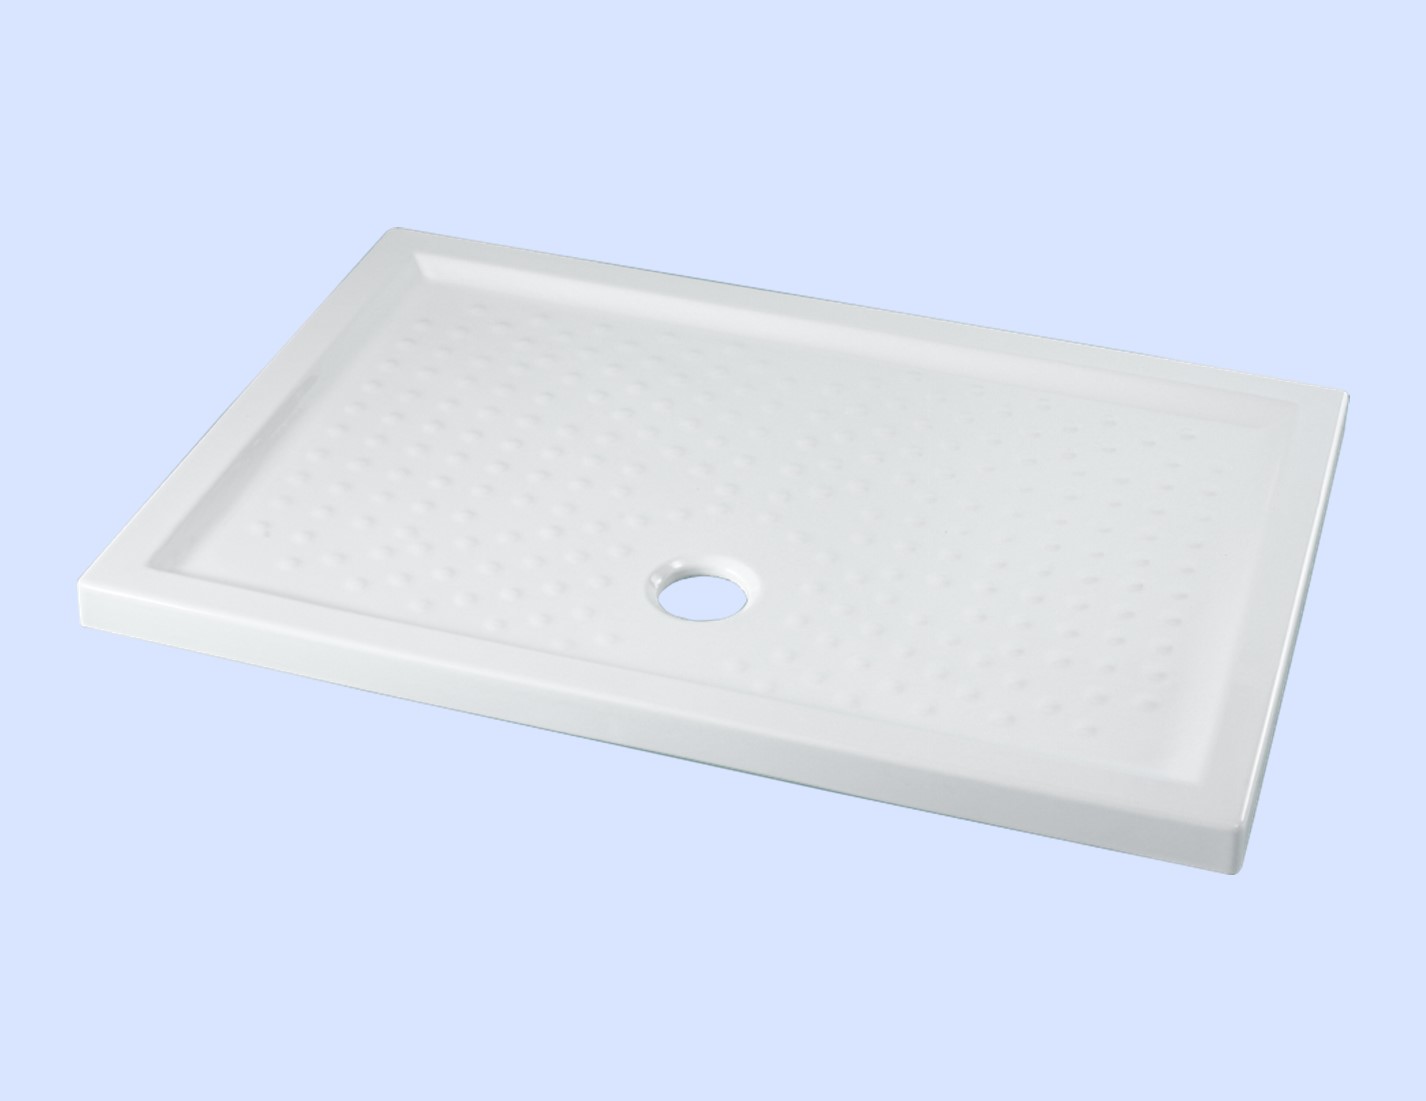 Shower tray to put